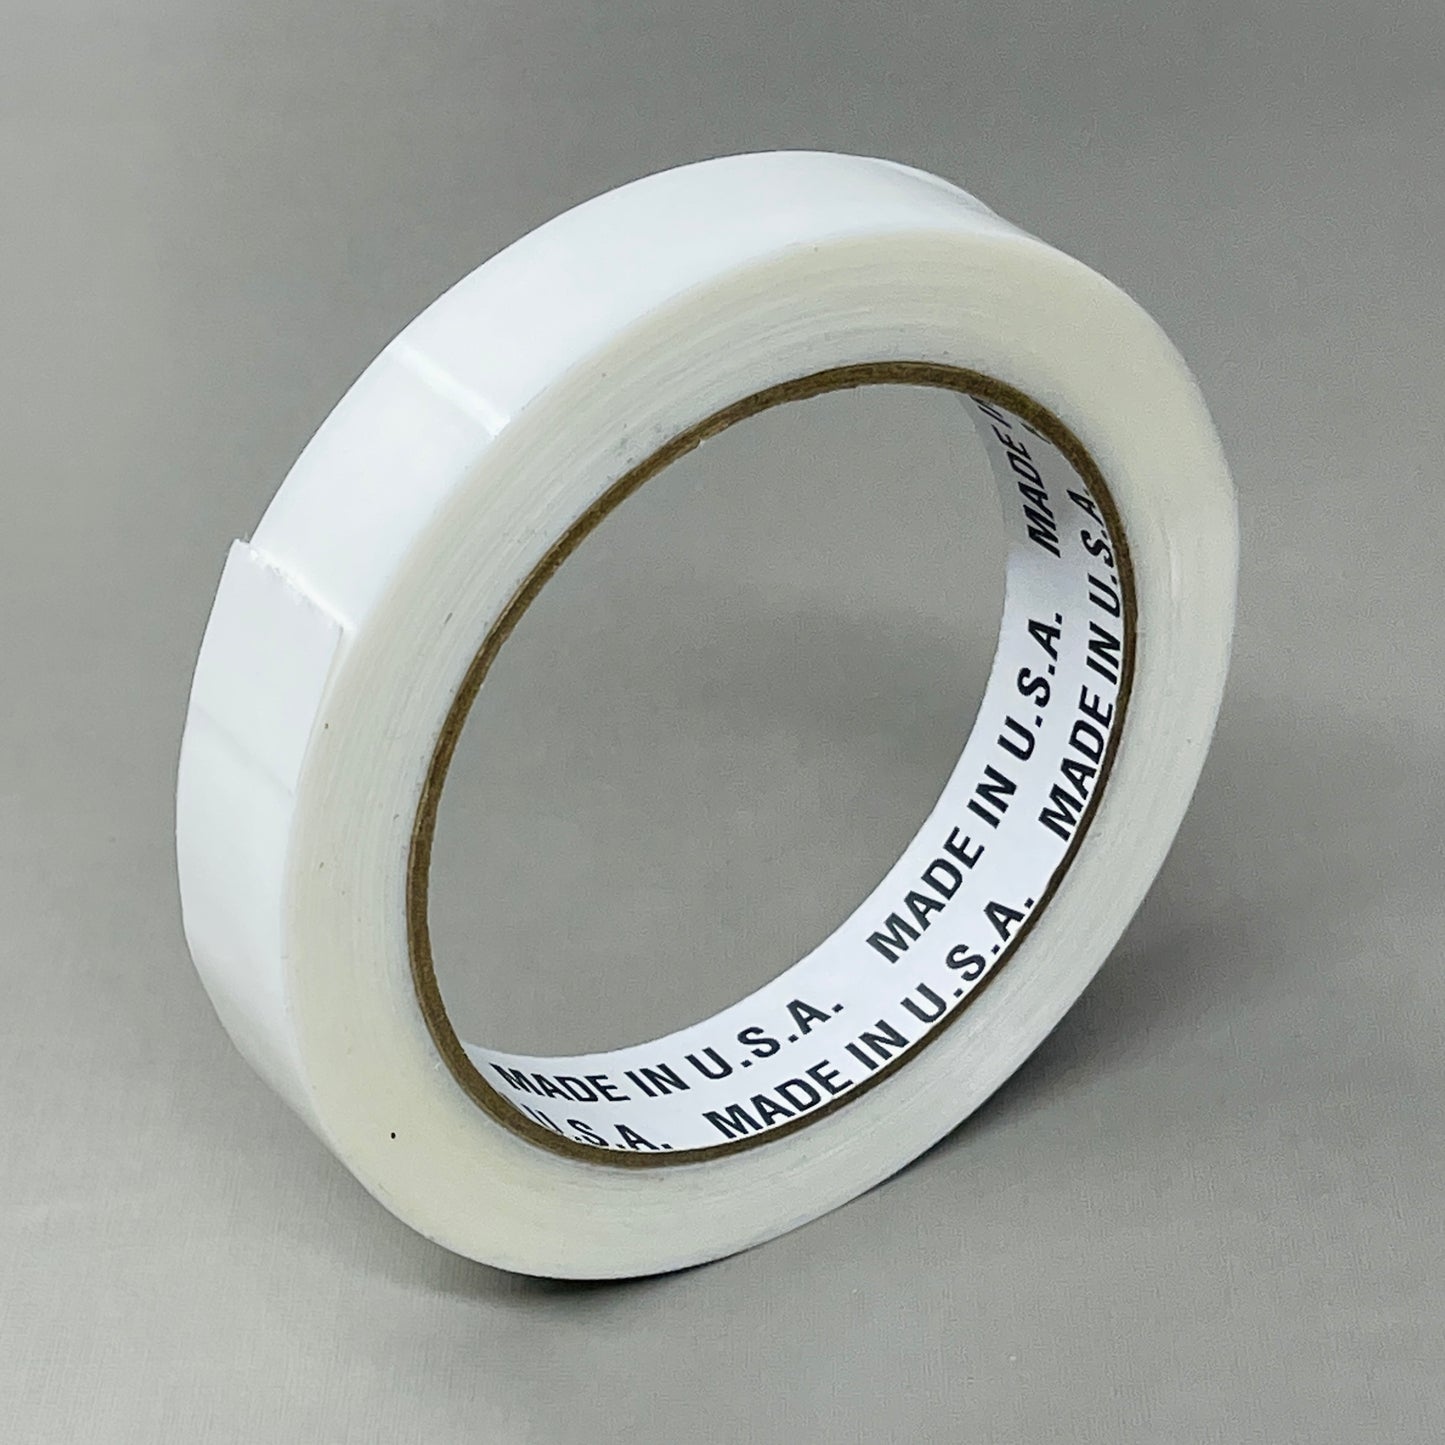 96 ROLLS! Strapping Tape 105 18mm 55m White 22180 (New)